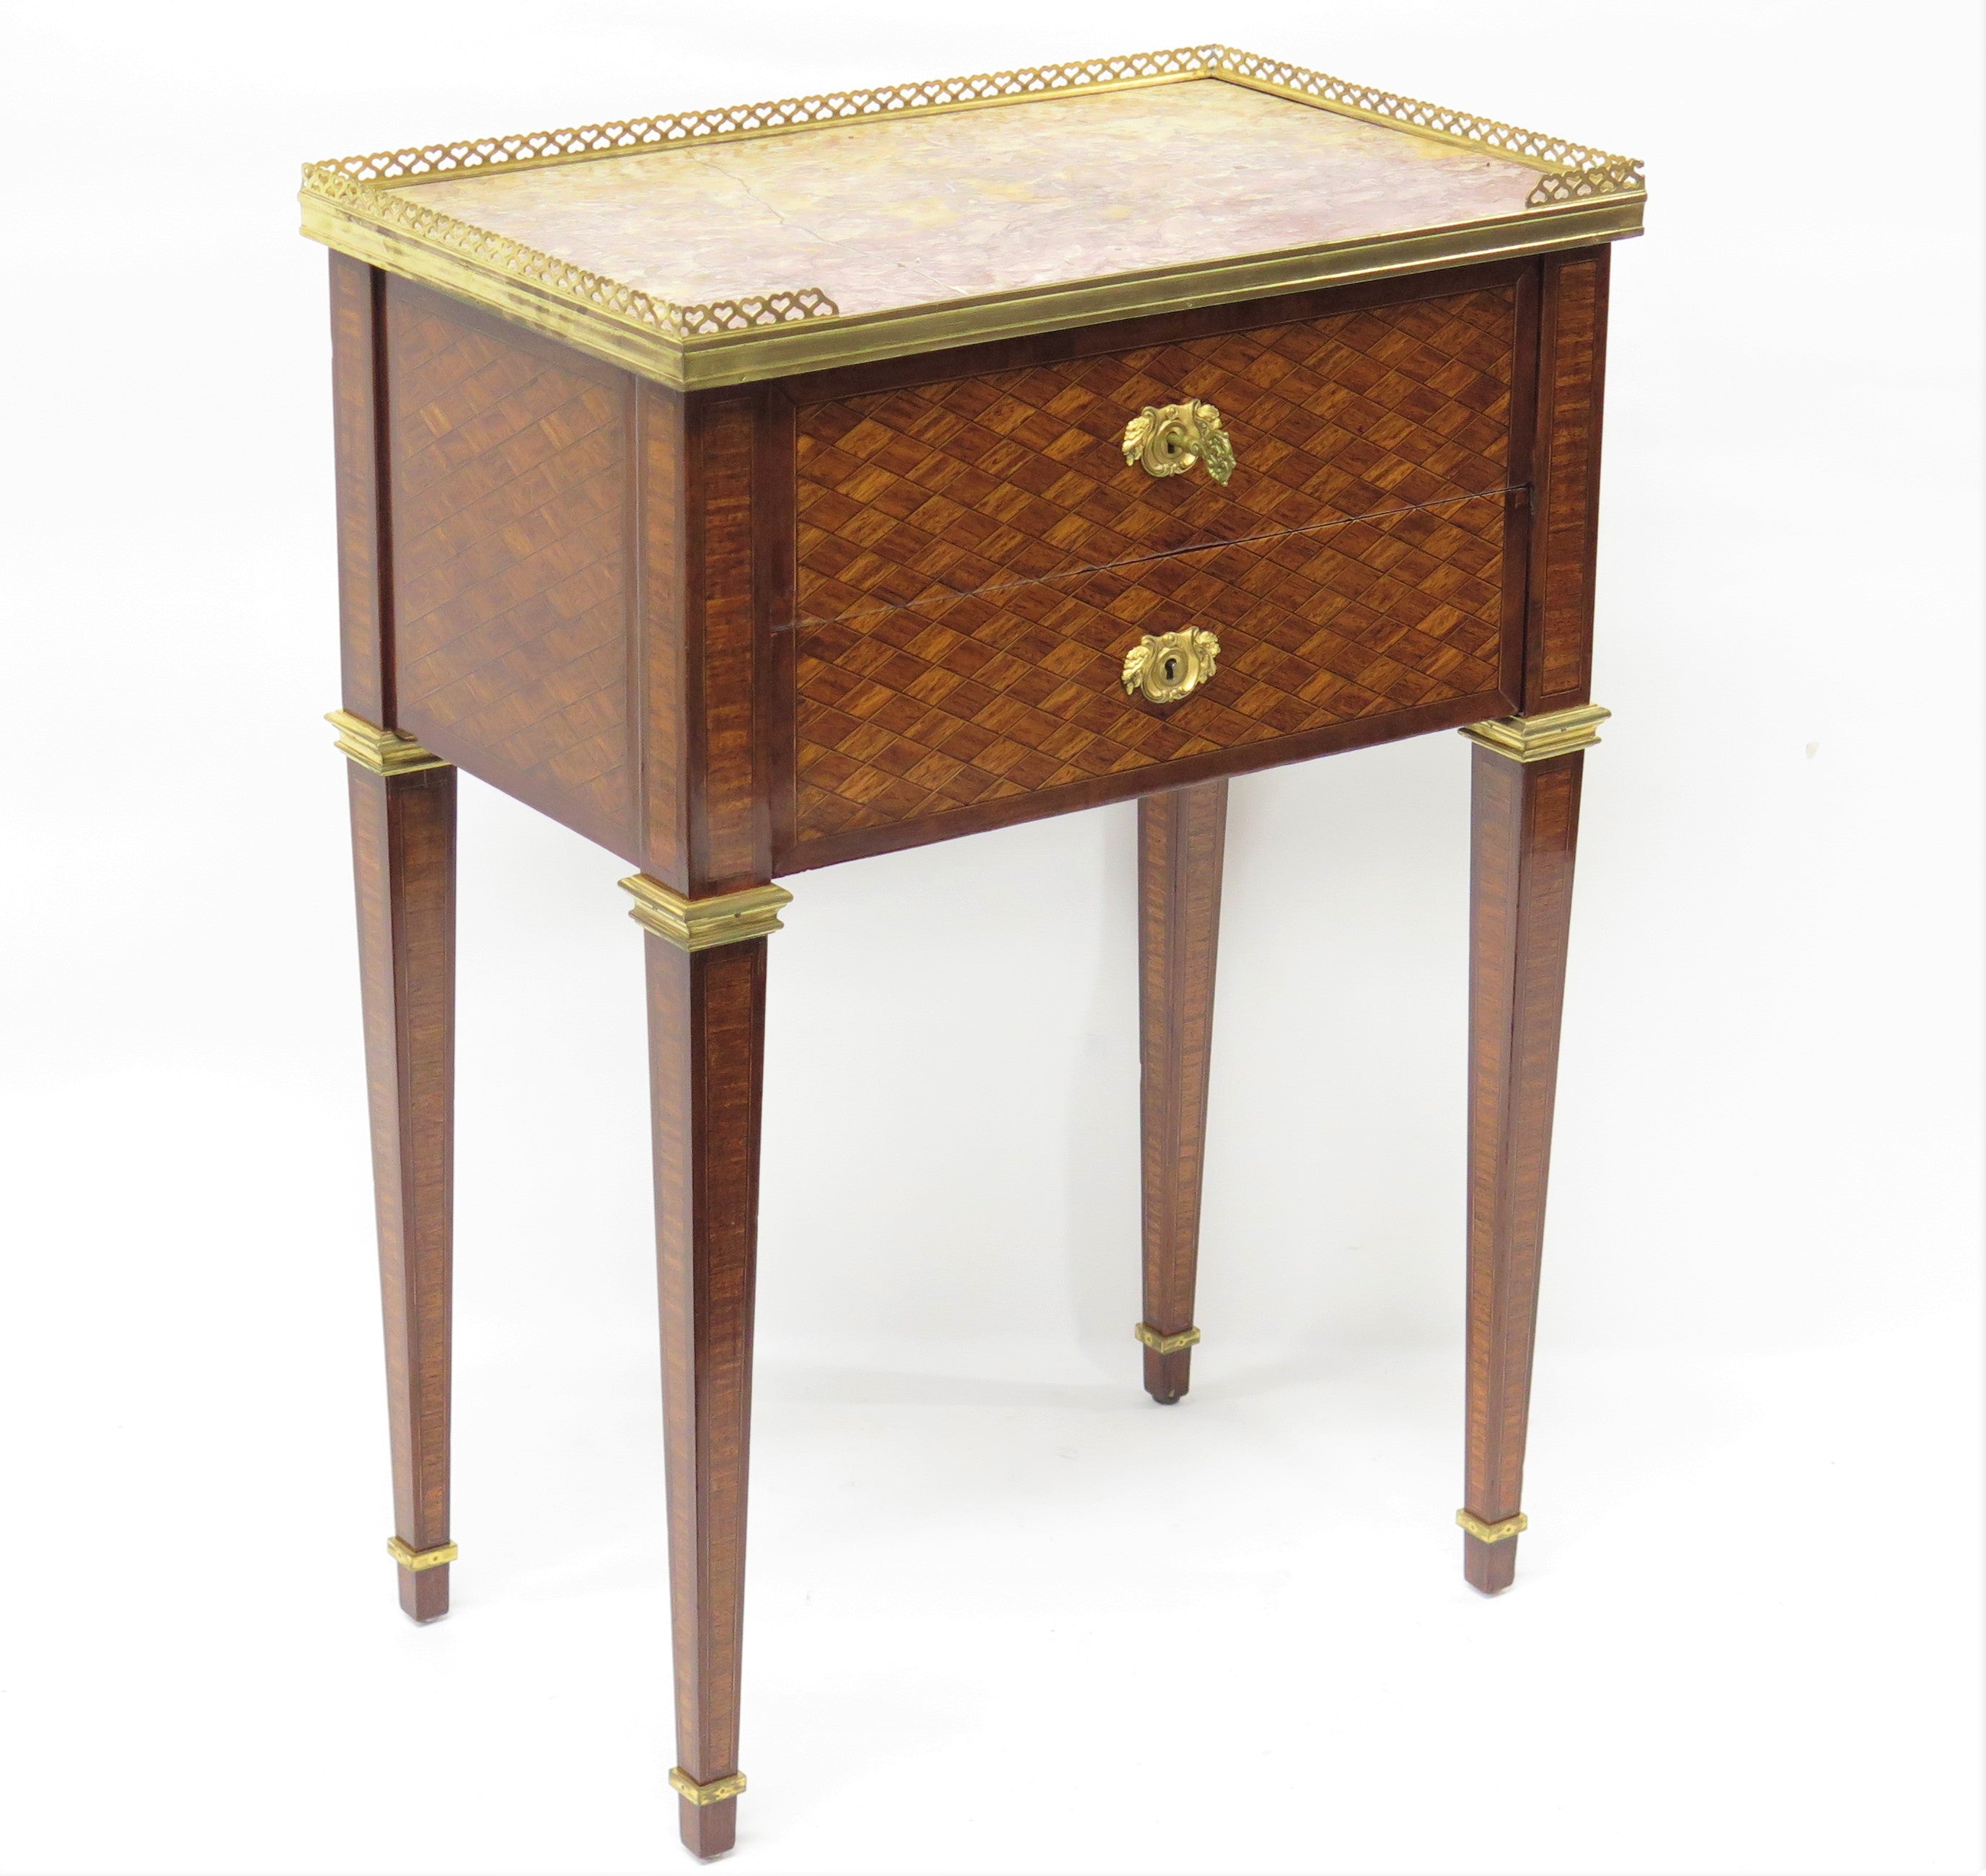 Louis XVI Style Working or Bedside Table with a Marble Top